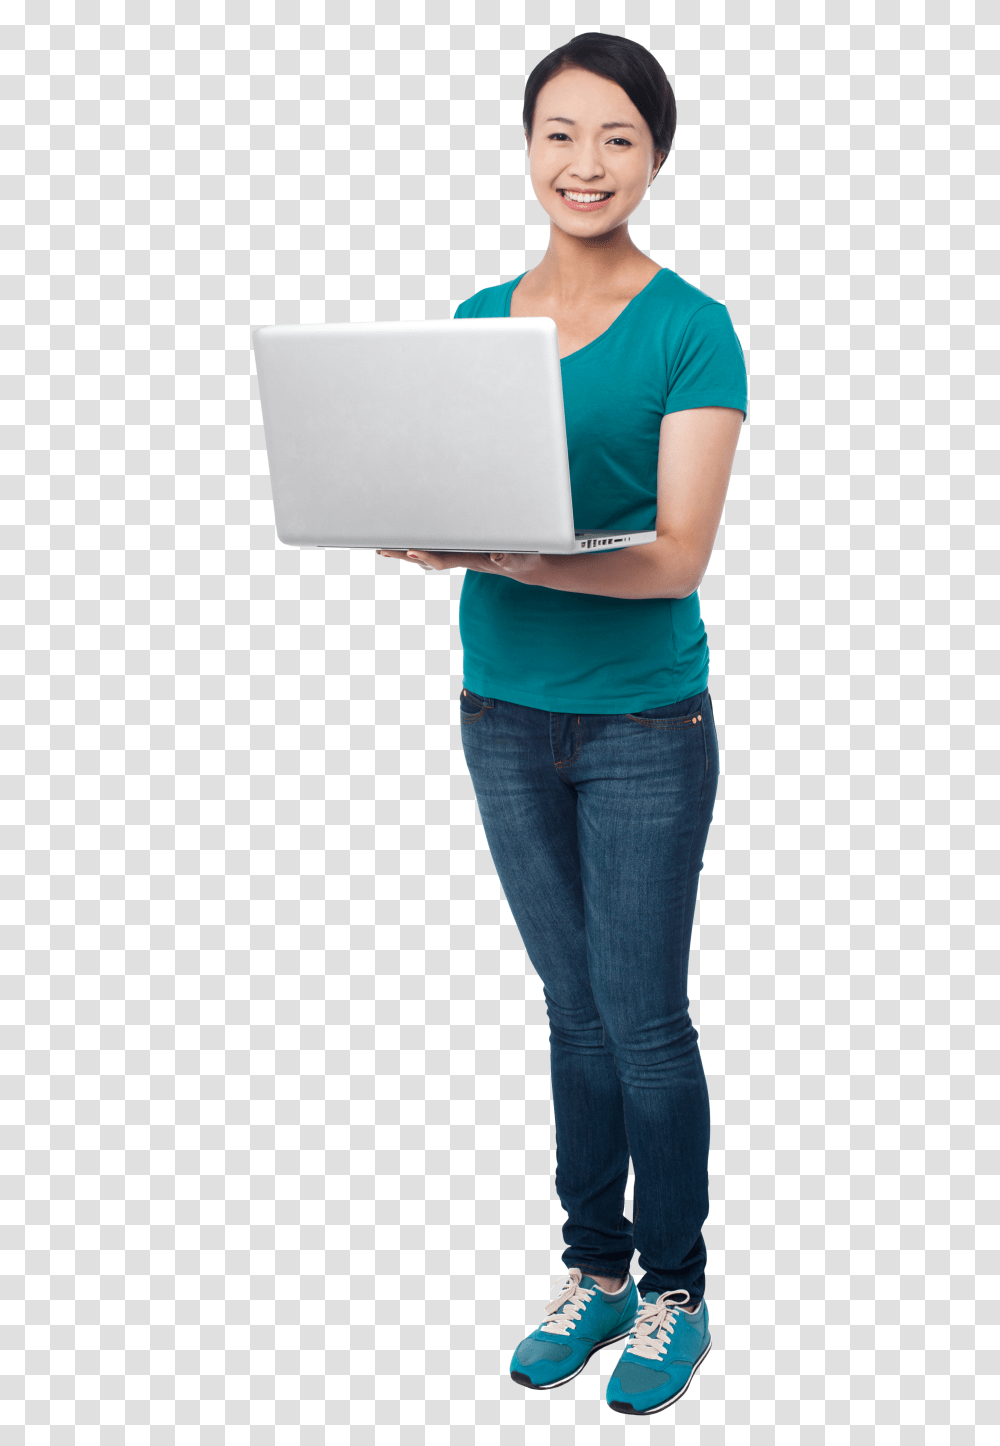 Girl With Laptop Image Girl With Laptop, Person, Human, Apparel Transparent Png